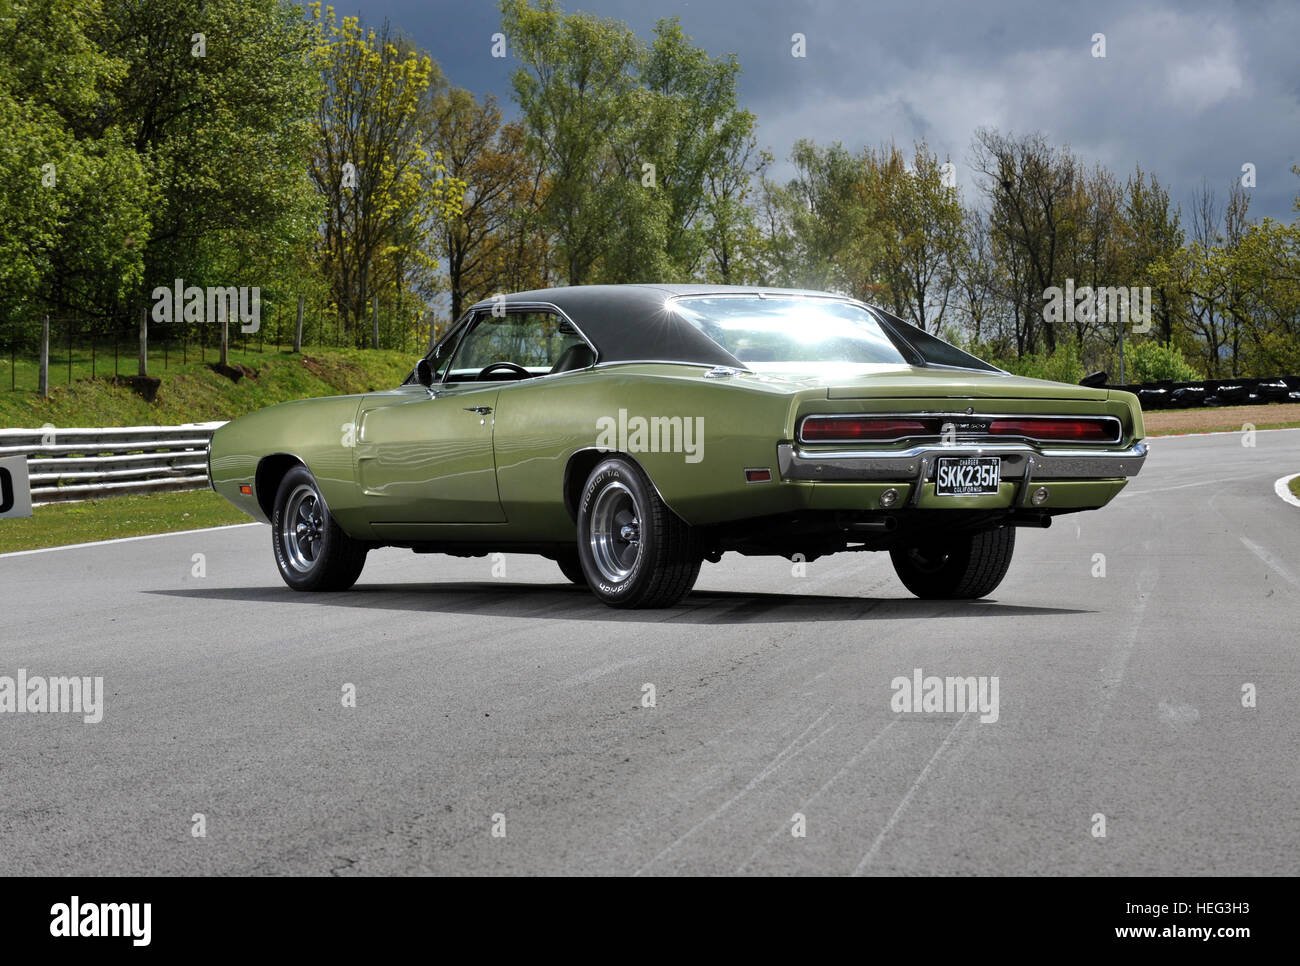 1970 Dodge Charger 500 classic American muscle car Foto Stock